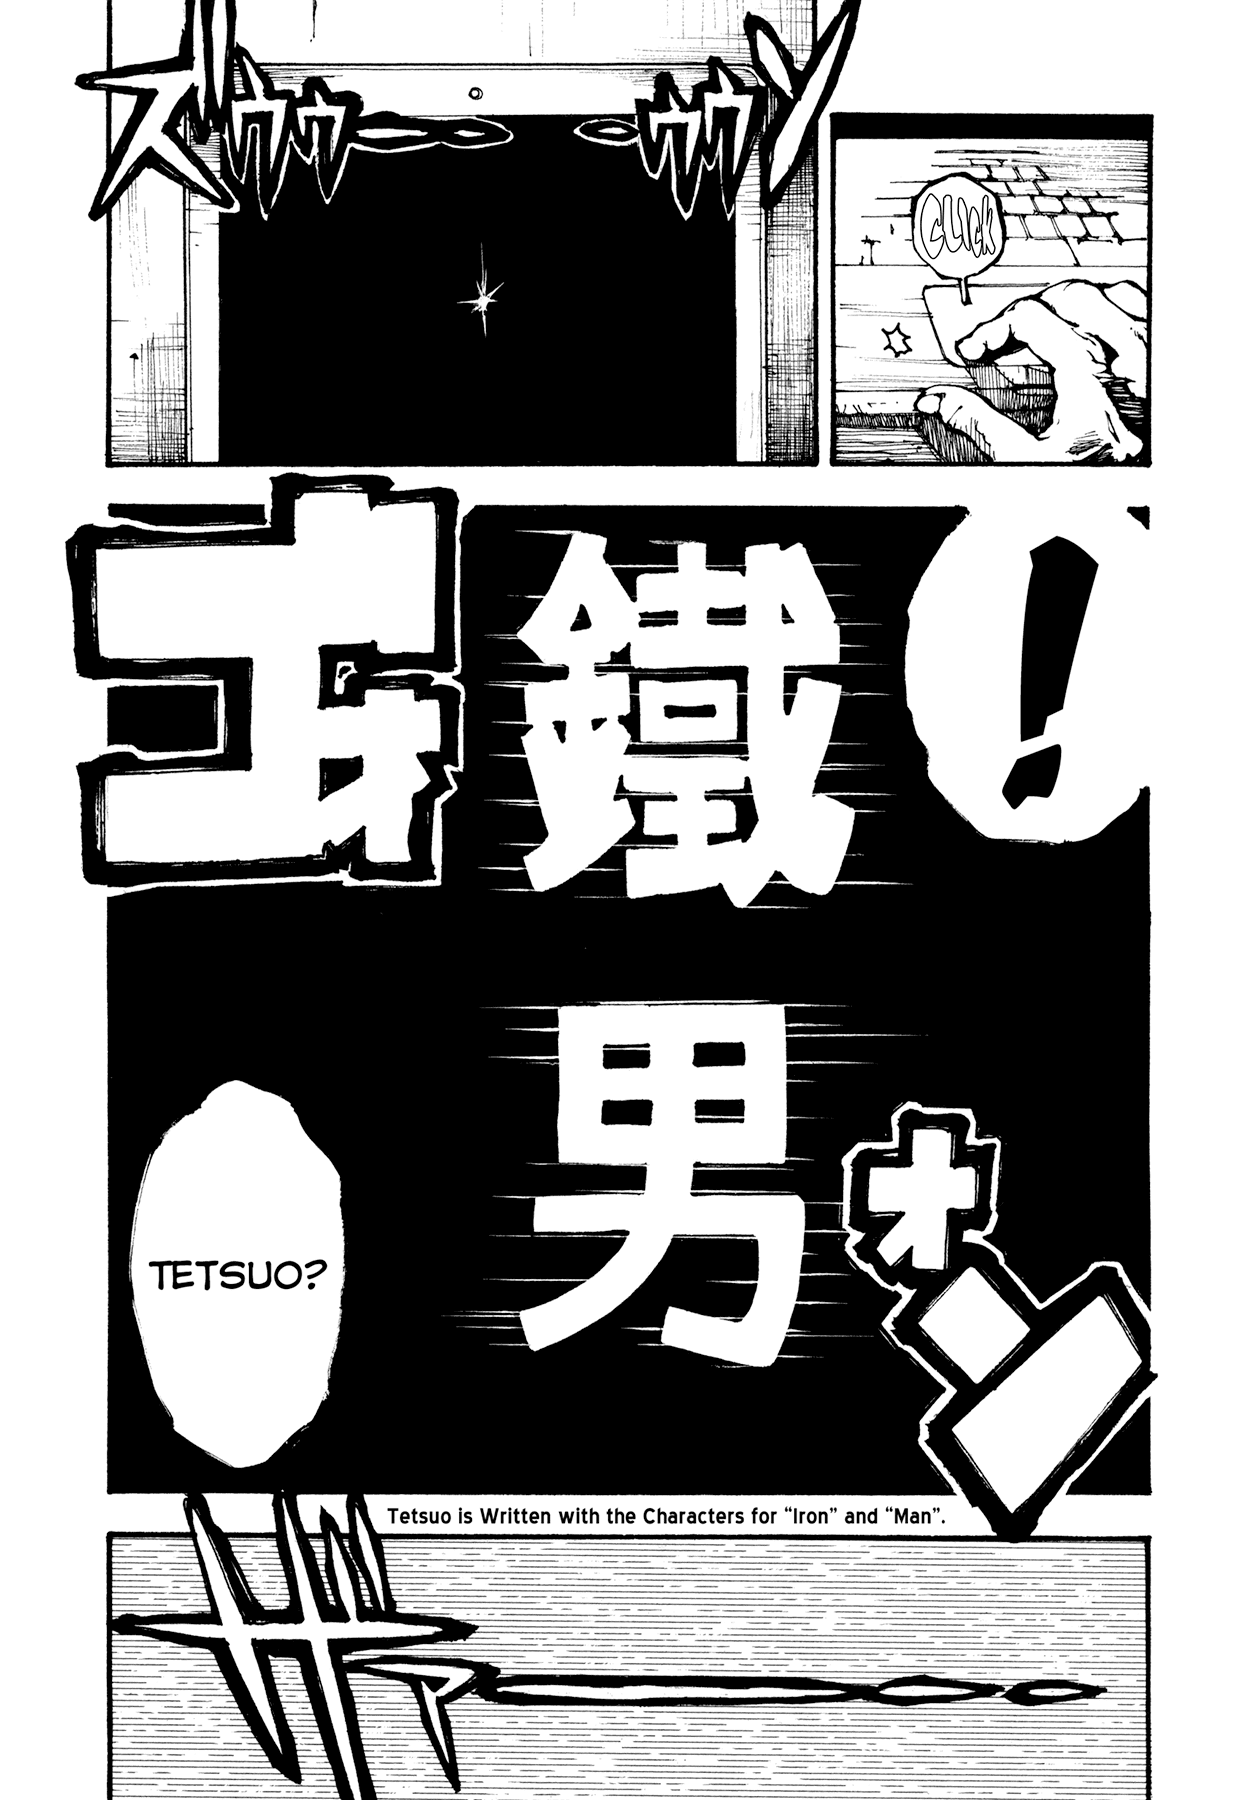 Tetsuo: The Bullet Man - Page 2